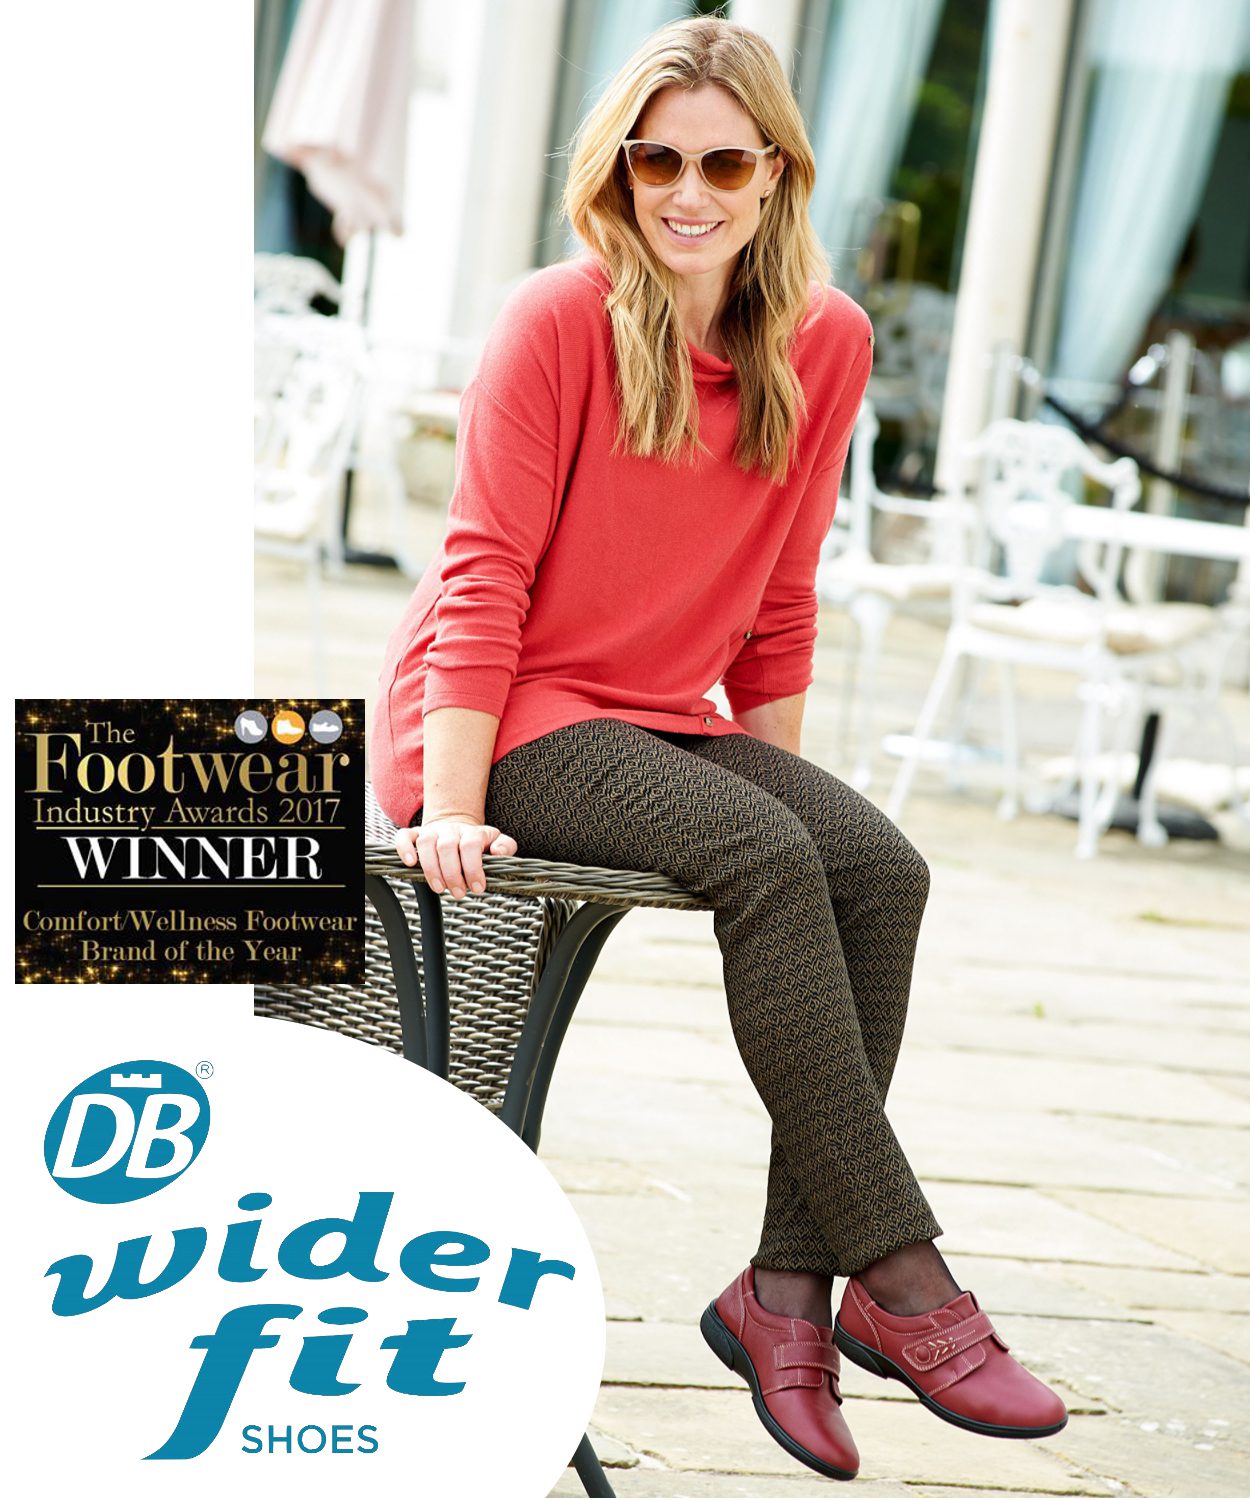 DB Wider fit ladies shoes - Exclusive 